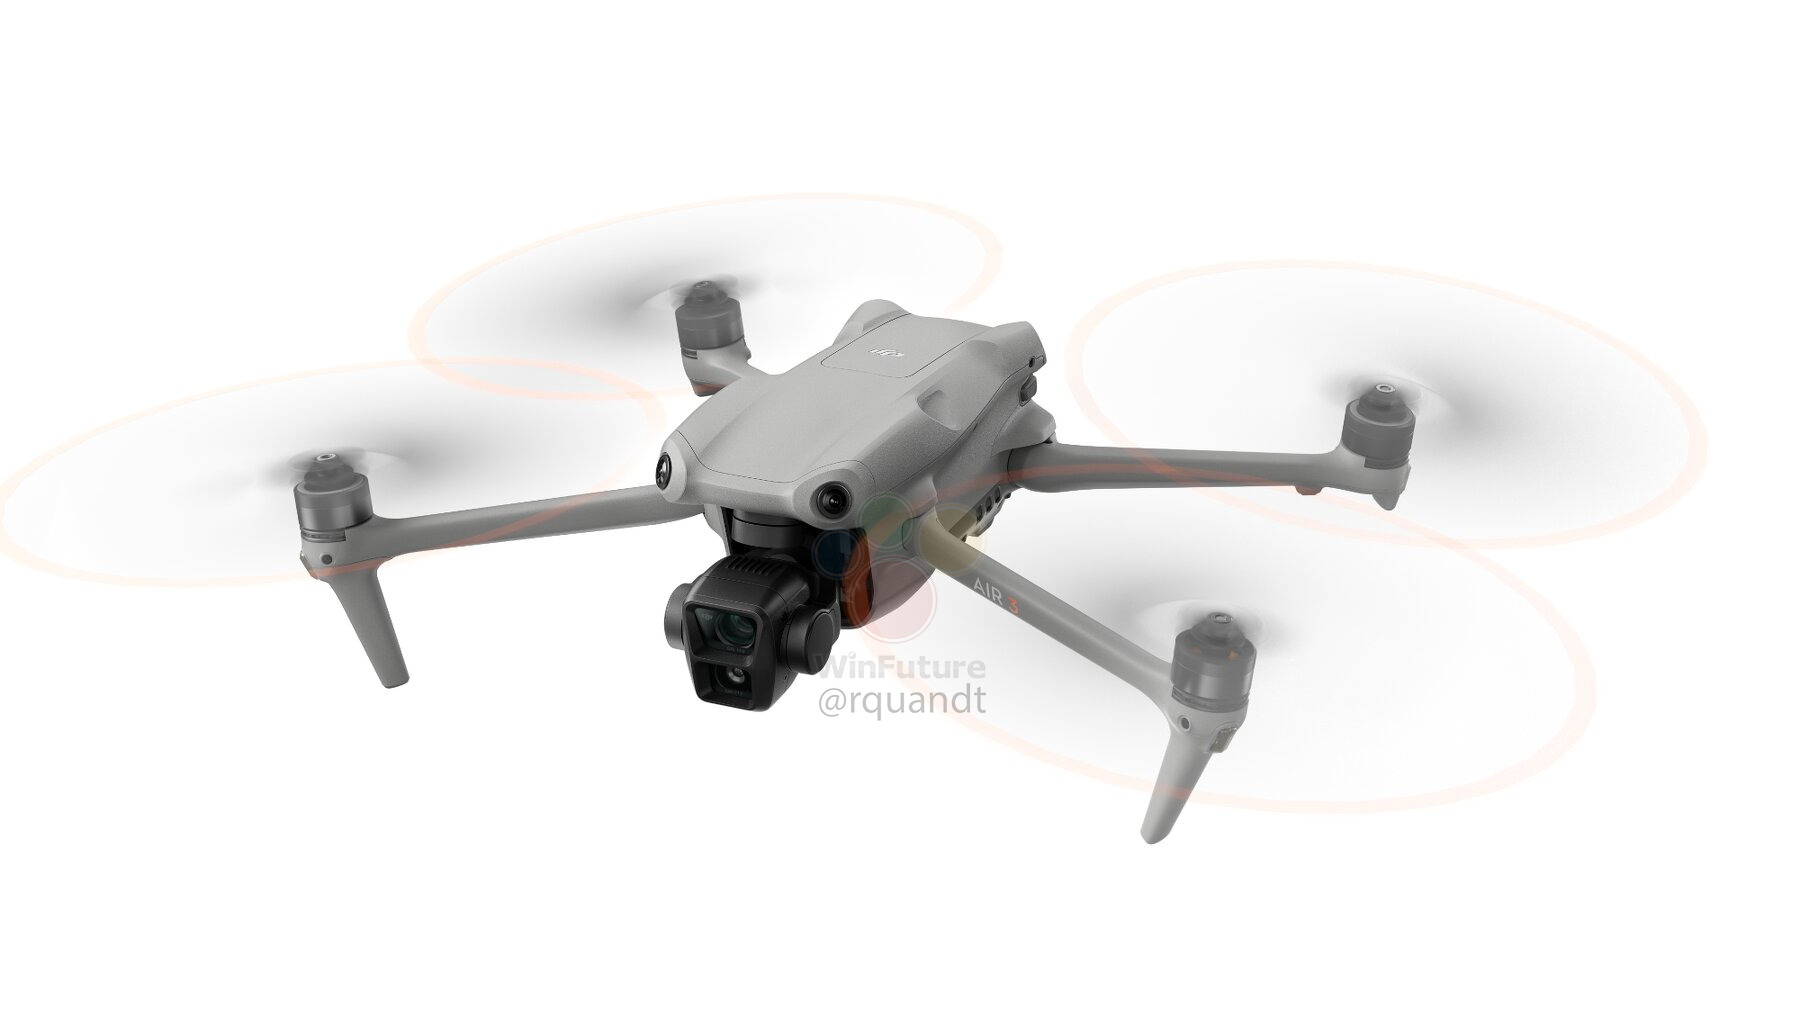 Leaker suggests DJI Air 3 drone release slated for June or July